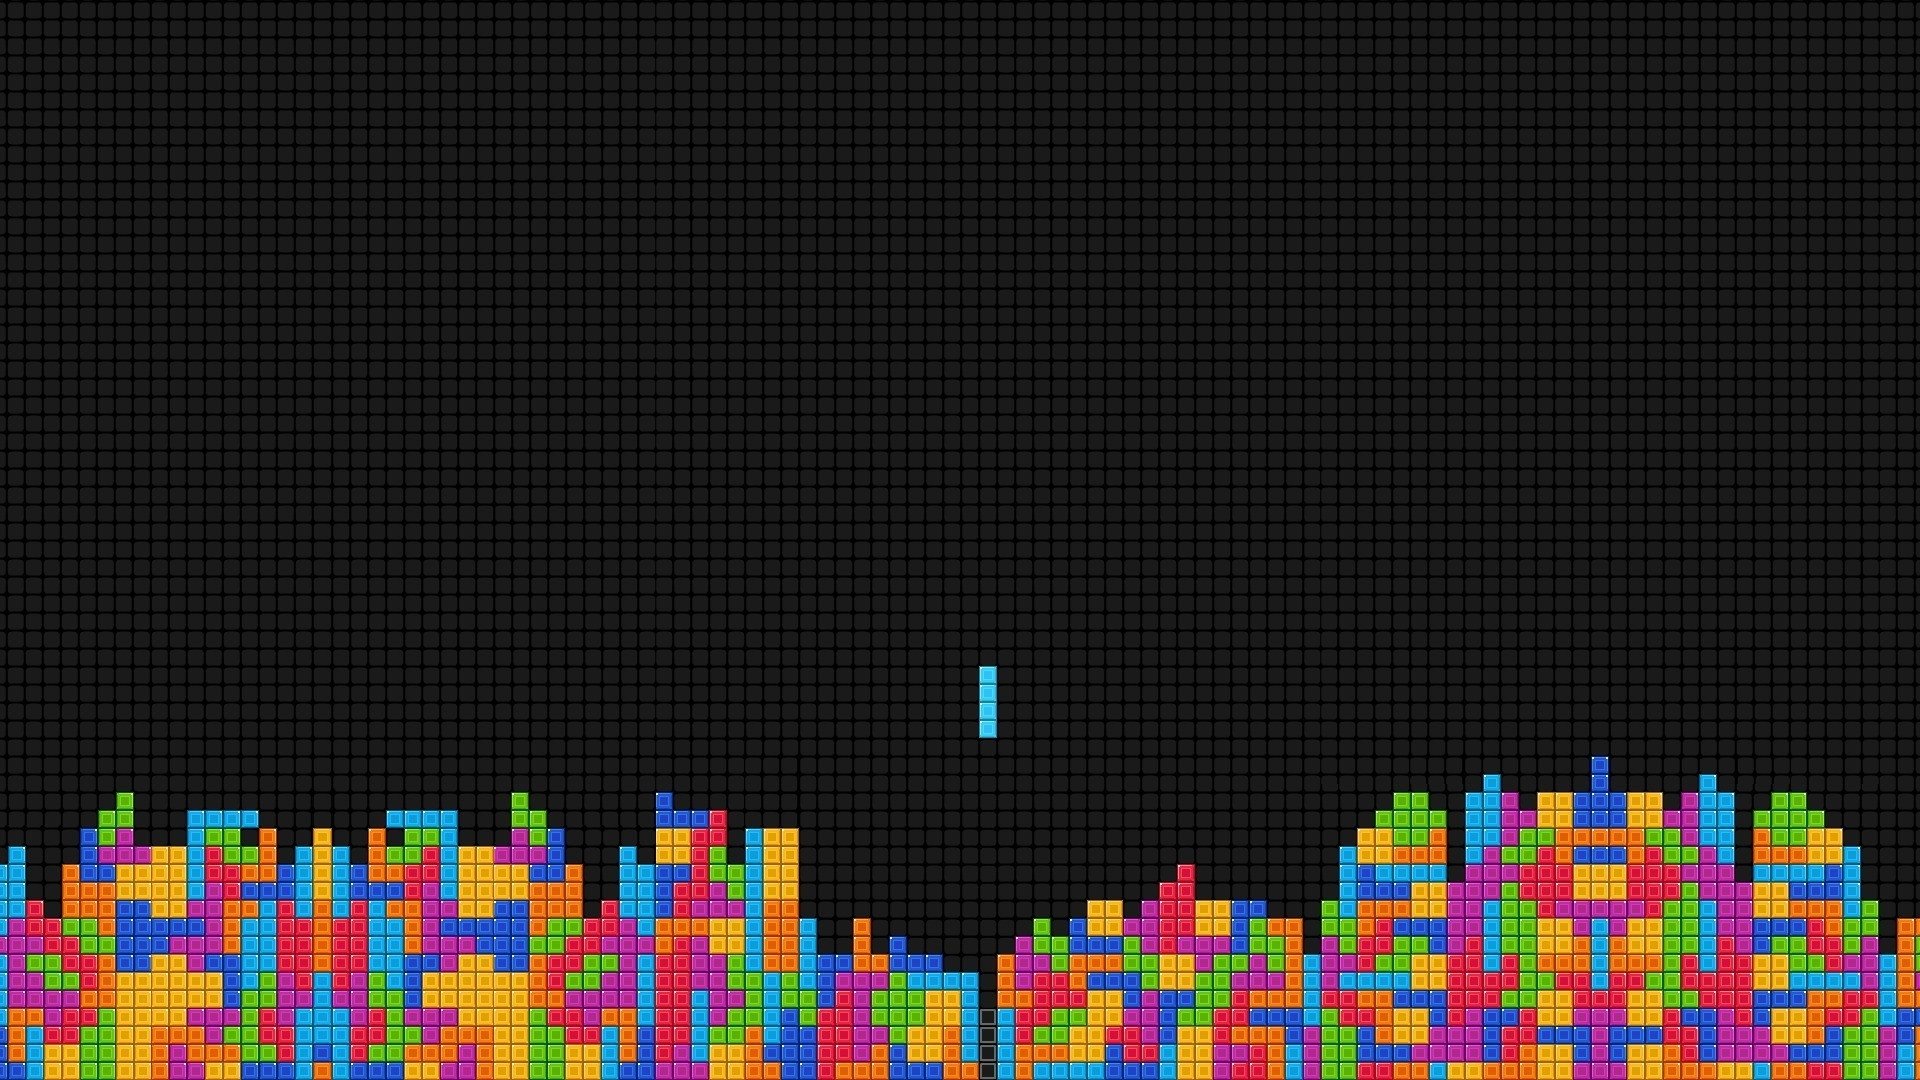 Tetris HD Wallpapers and Background Images   stmednet 1920x1080